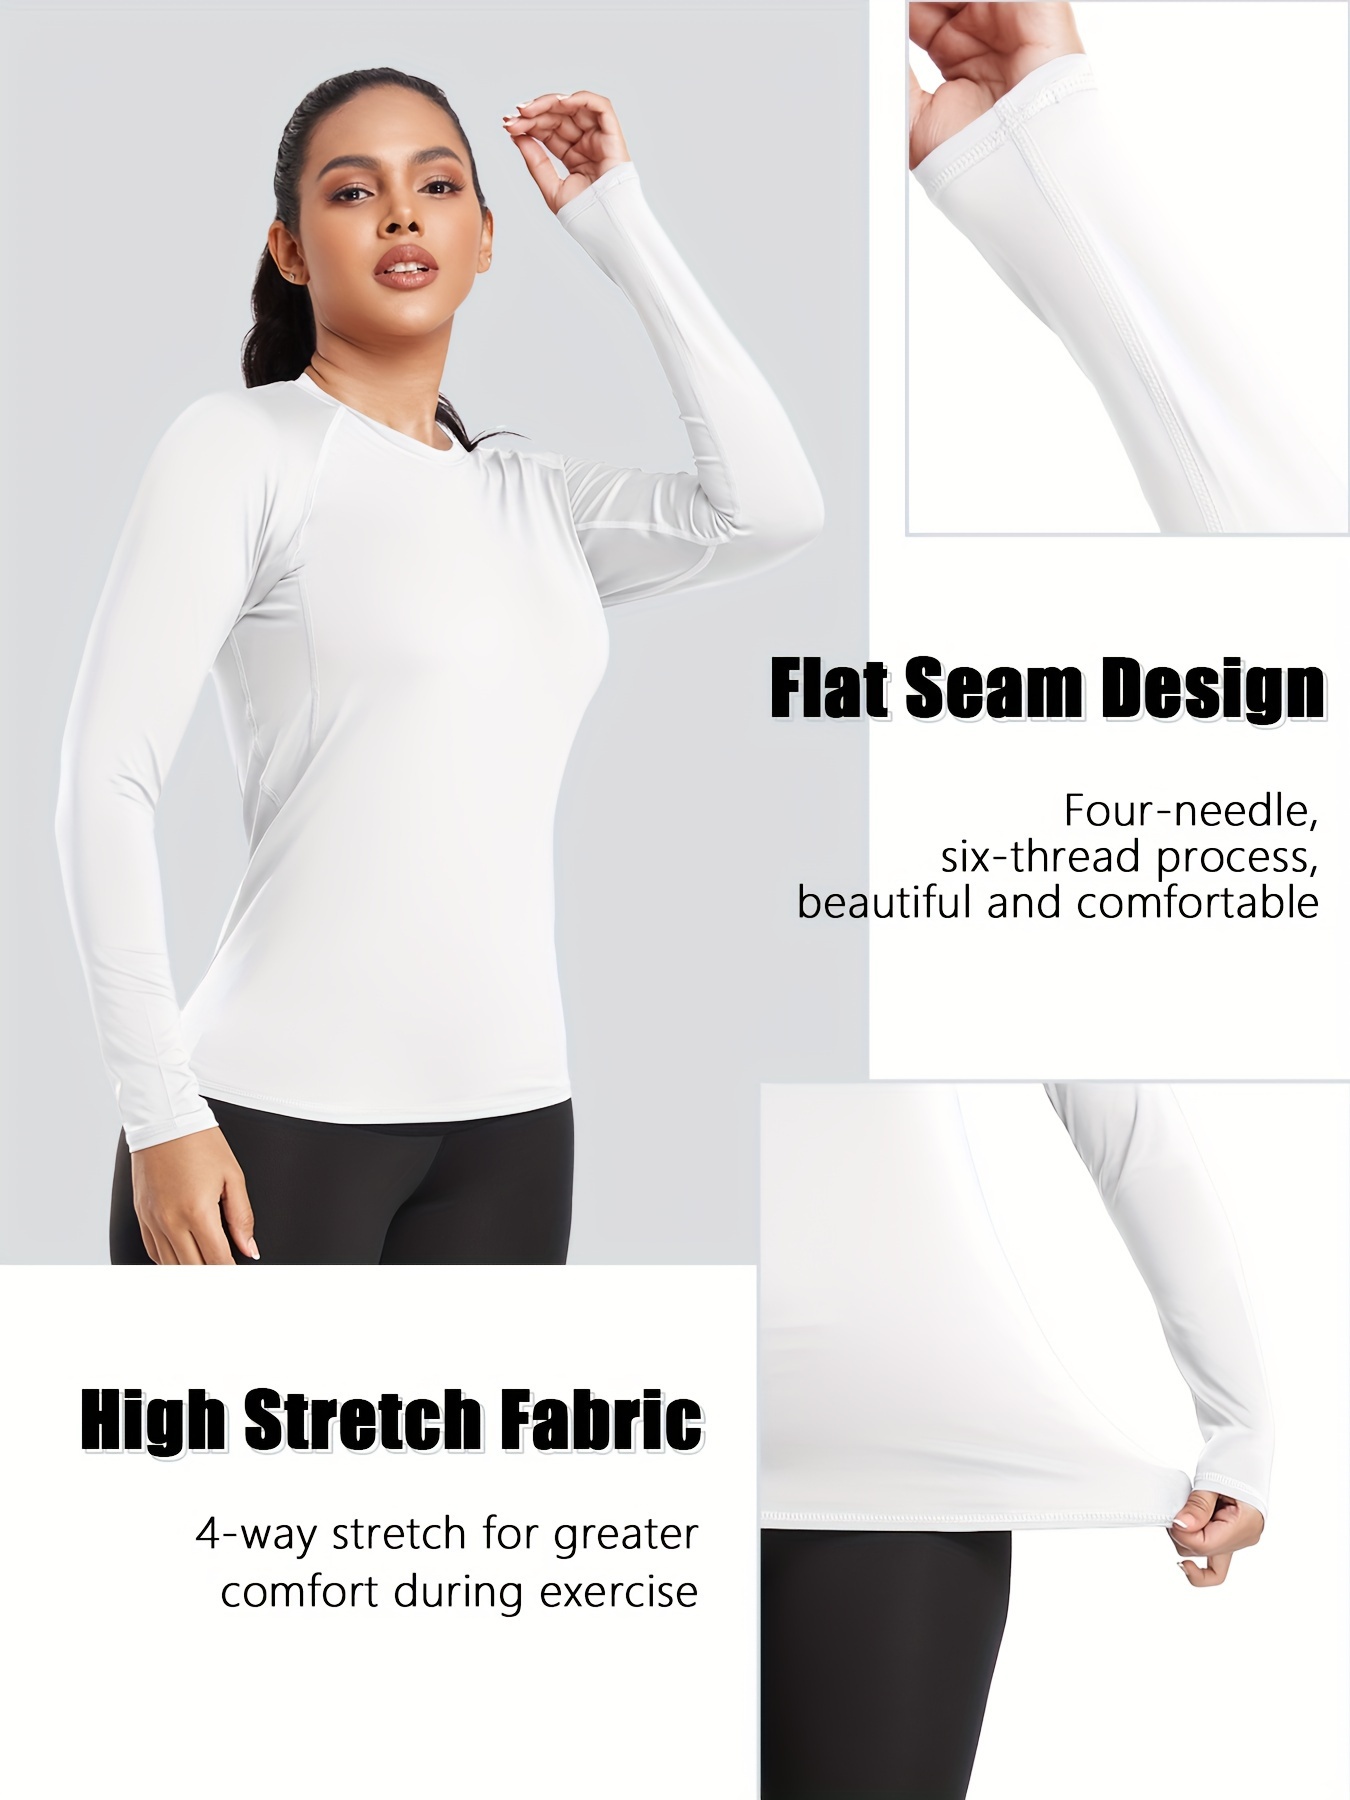 Long Sleeved Ladies Sportswear: Fashionable And Comfortable